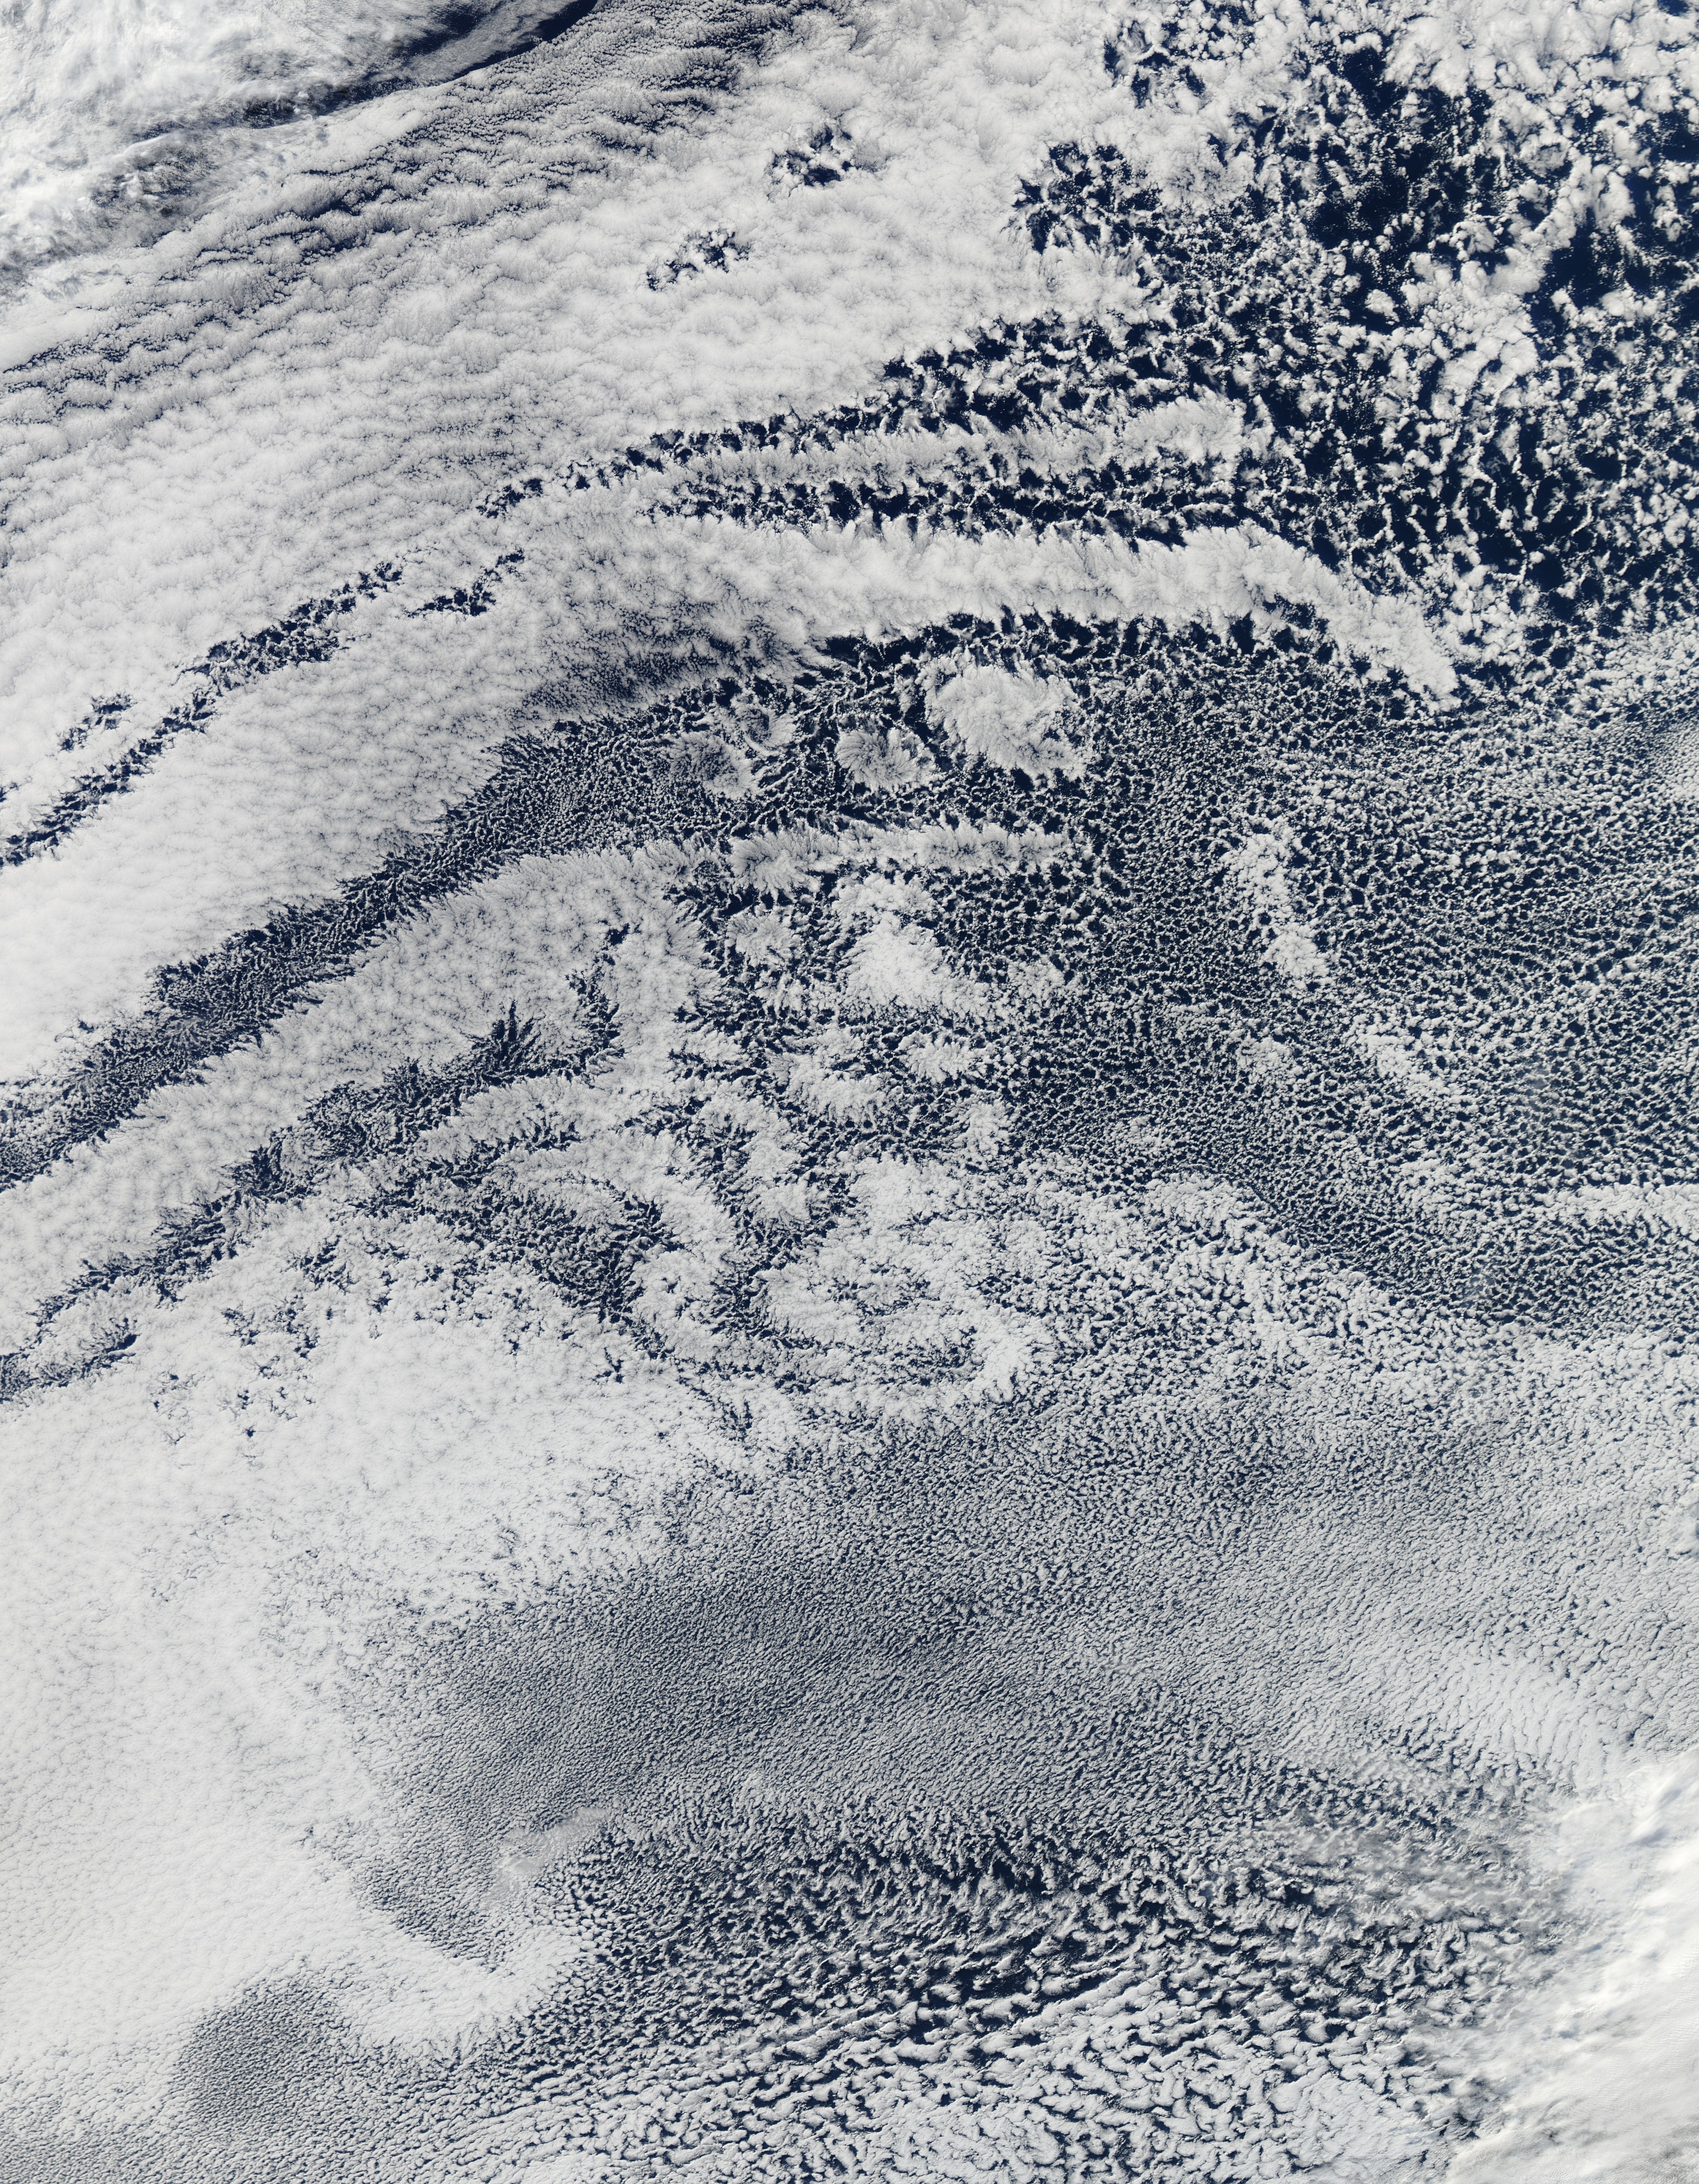 Open- and Closed-Cell Clouds over the Pacific Ocean